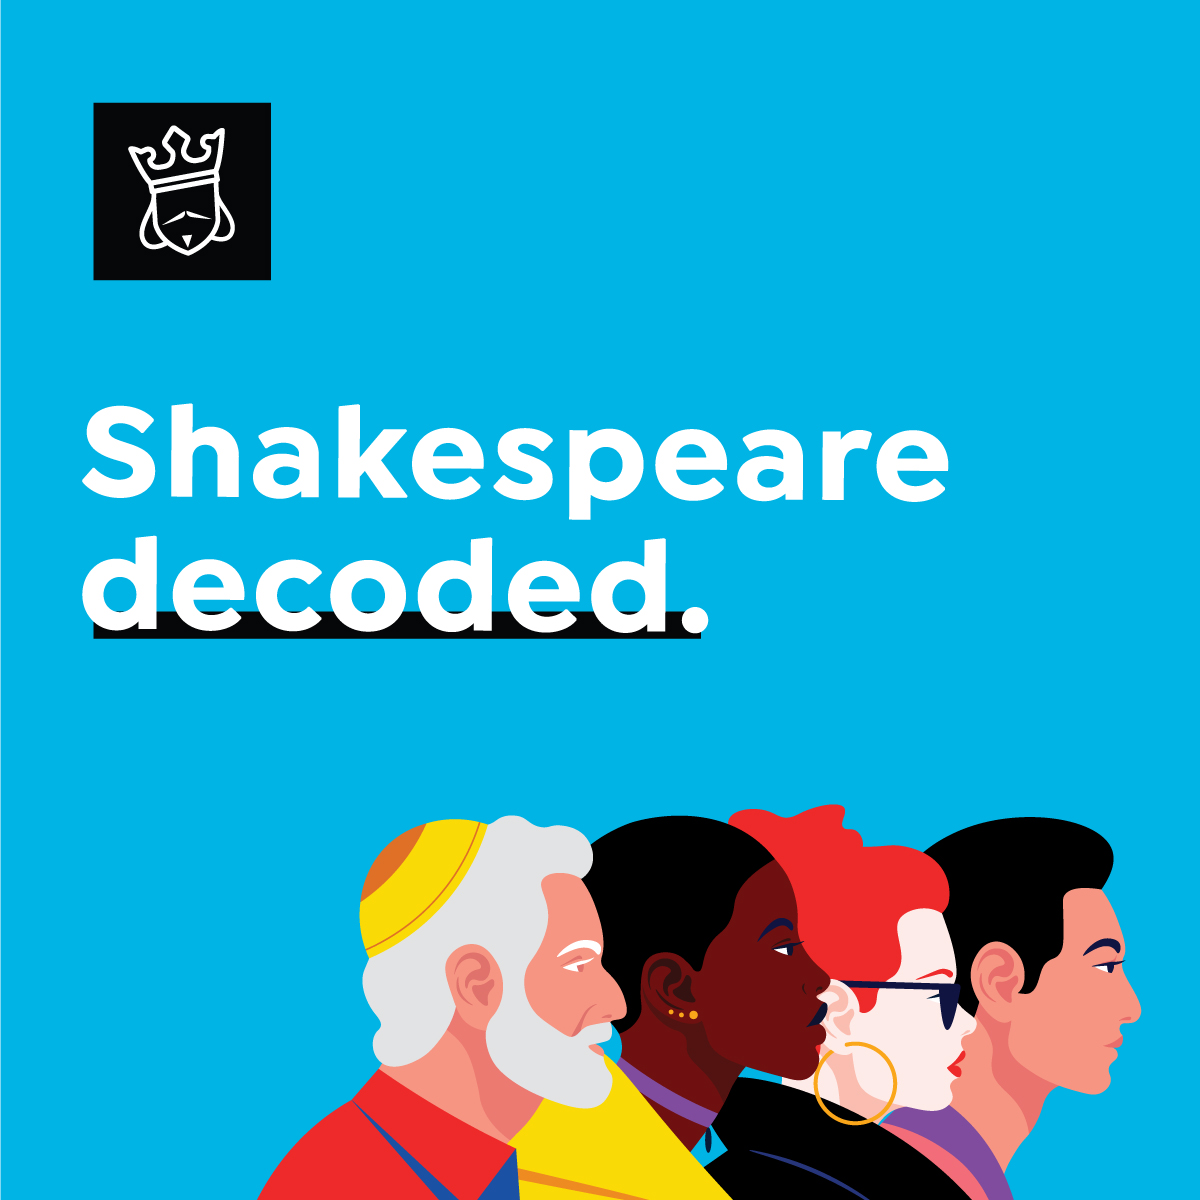 Shakespeare Decoded – “Dramaturgy and Translation as the Gateway to Shakespeare Engagement”